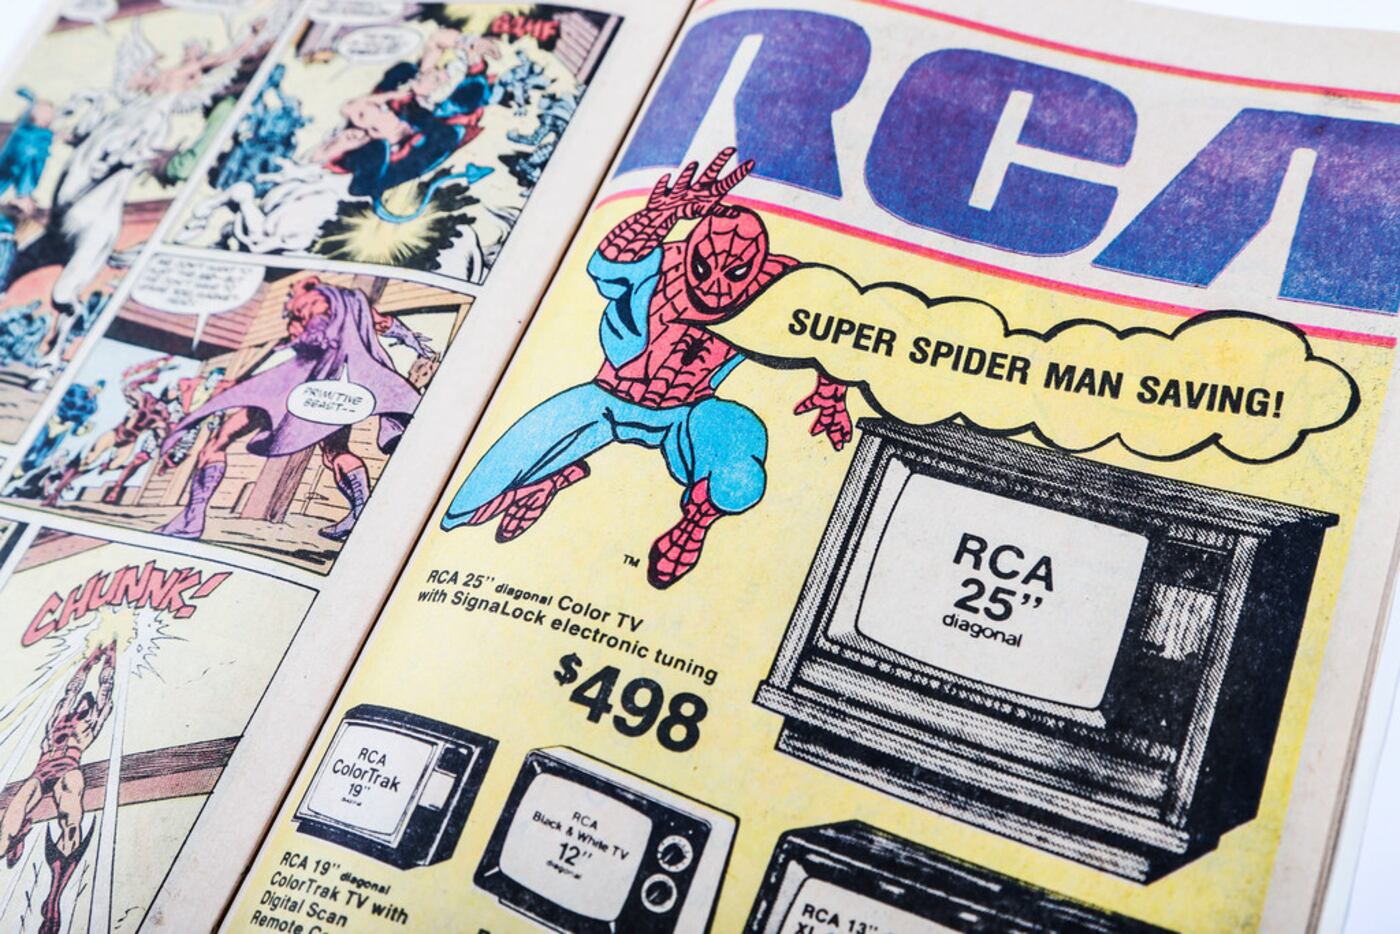 An RCA advertisement featuring Spider-Man in "The Uncanny X-Men at the State Fair of Texas."